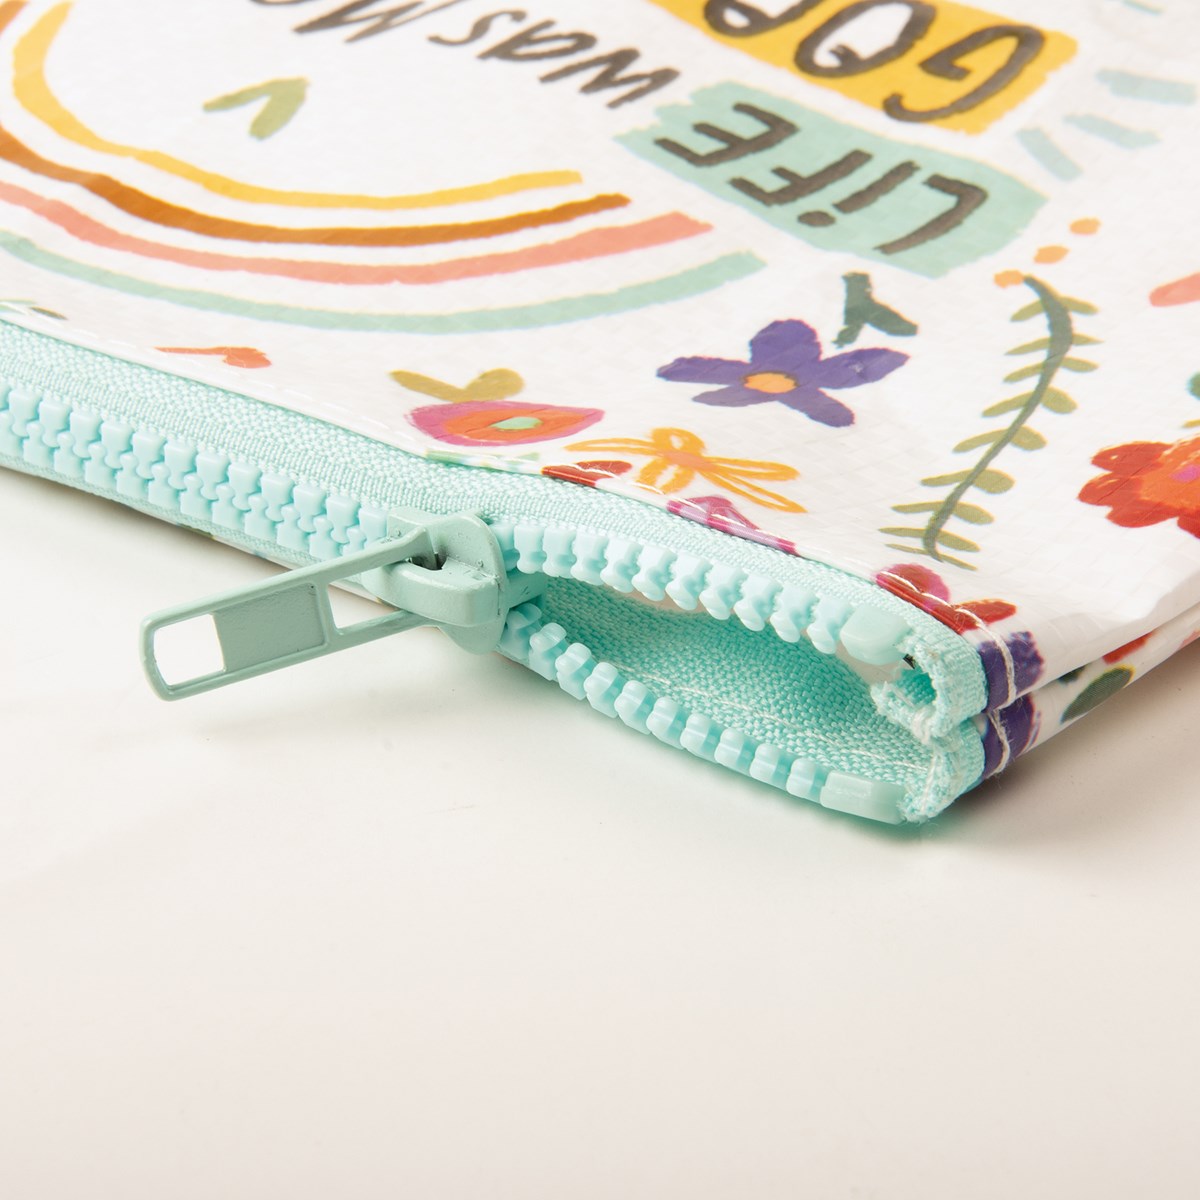 Zipper Pouch - Good Friends And Great Adventures - 9.50" x 7" - Post-Consumer Material, Plastic, Metal